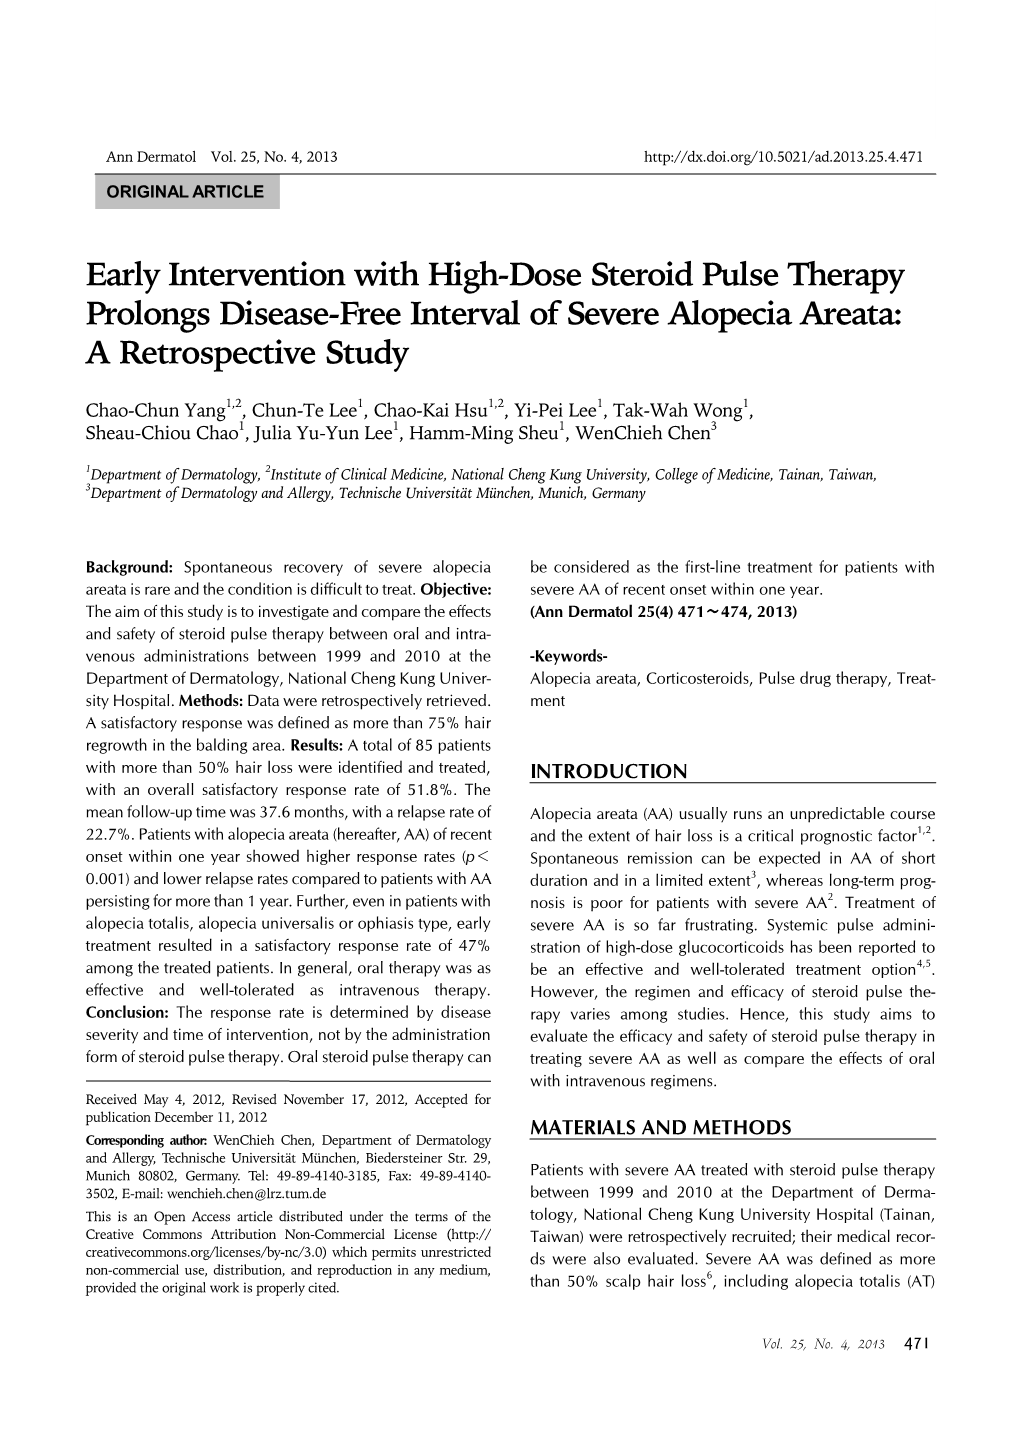 Early Intervention with High-Dose Steroid Pulse Therapy Prolongs Disease-Free Interval of Severe Alopecia Areata: a Retrospective Study